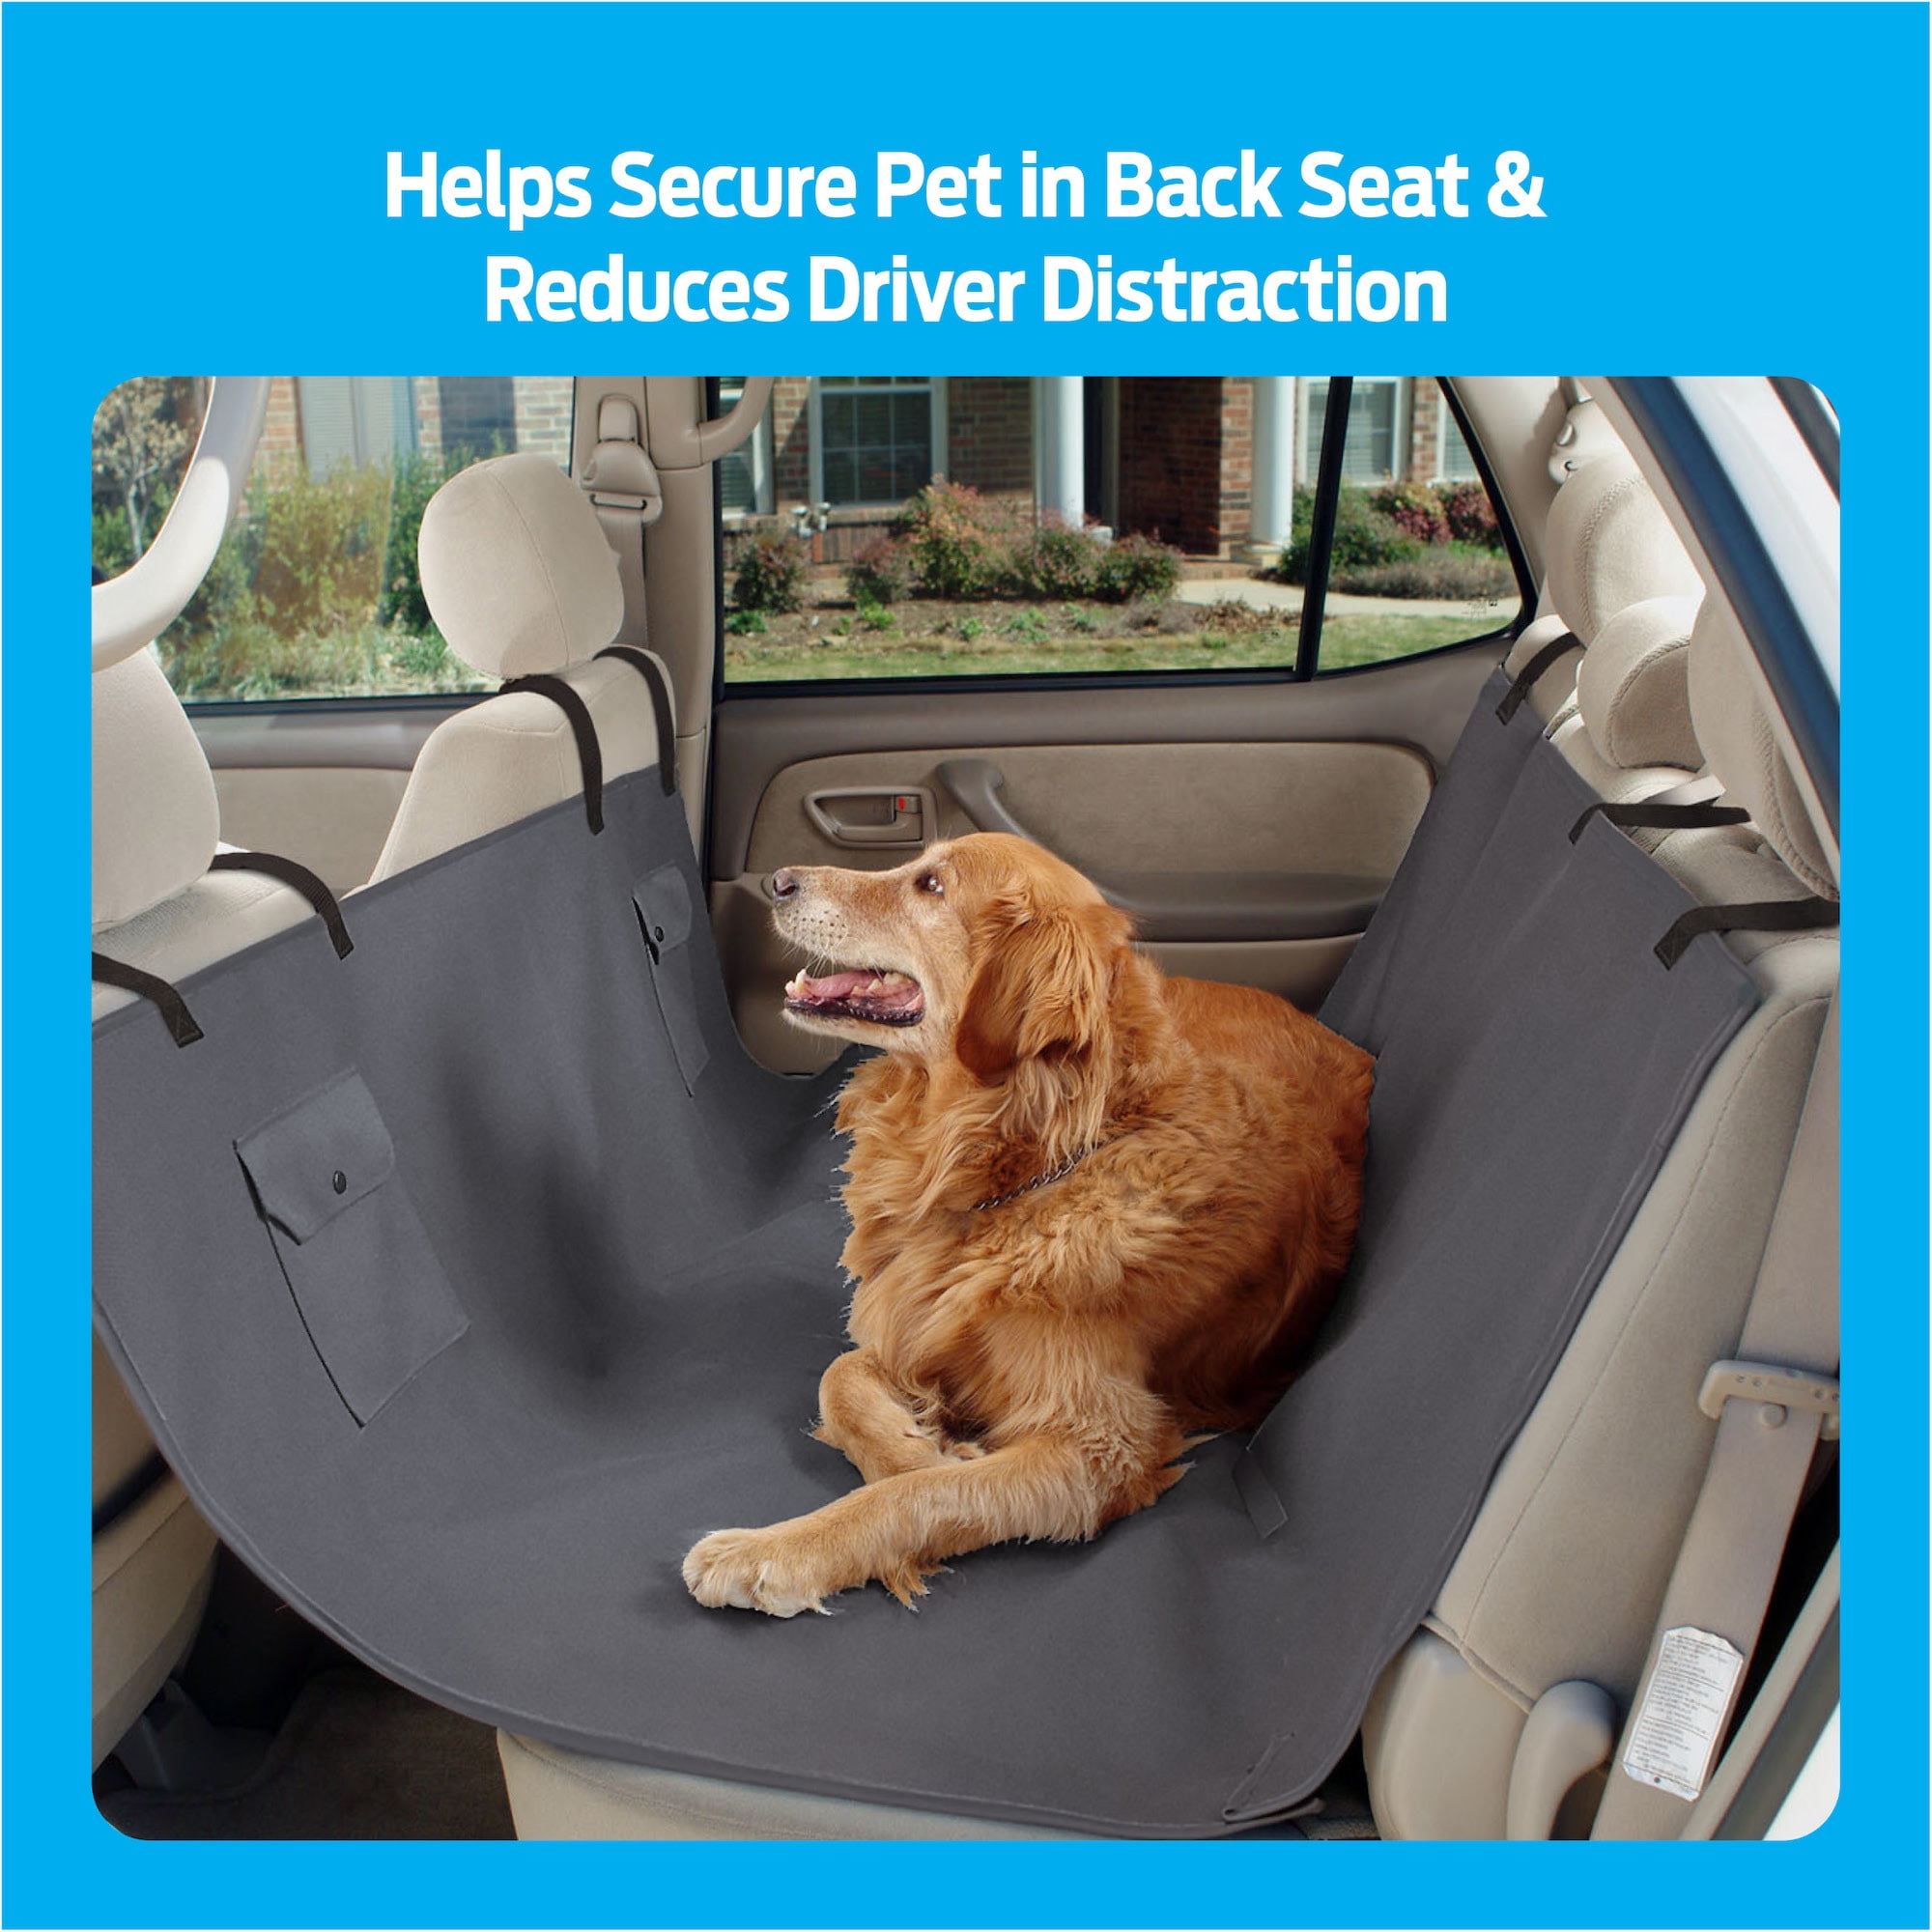 Premier Pet Car Hammock Seat Cover - Helps Secure Your Dog and Protect  Vehicle's Back Seat - Durable and Machine Washable Design Makes Clean Up  Easy - Walmart.com